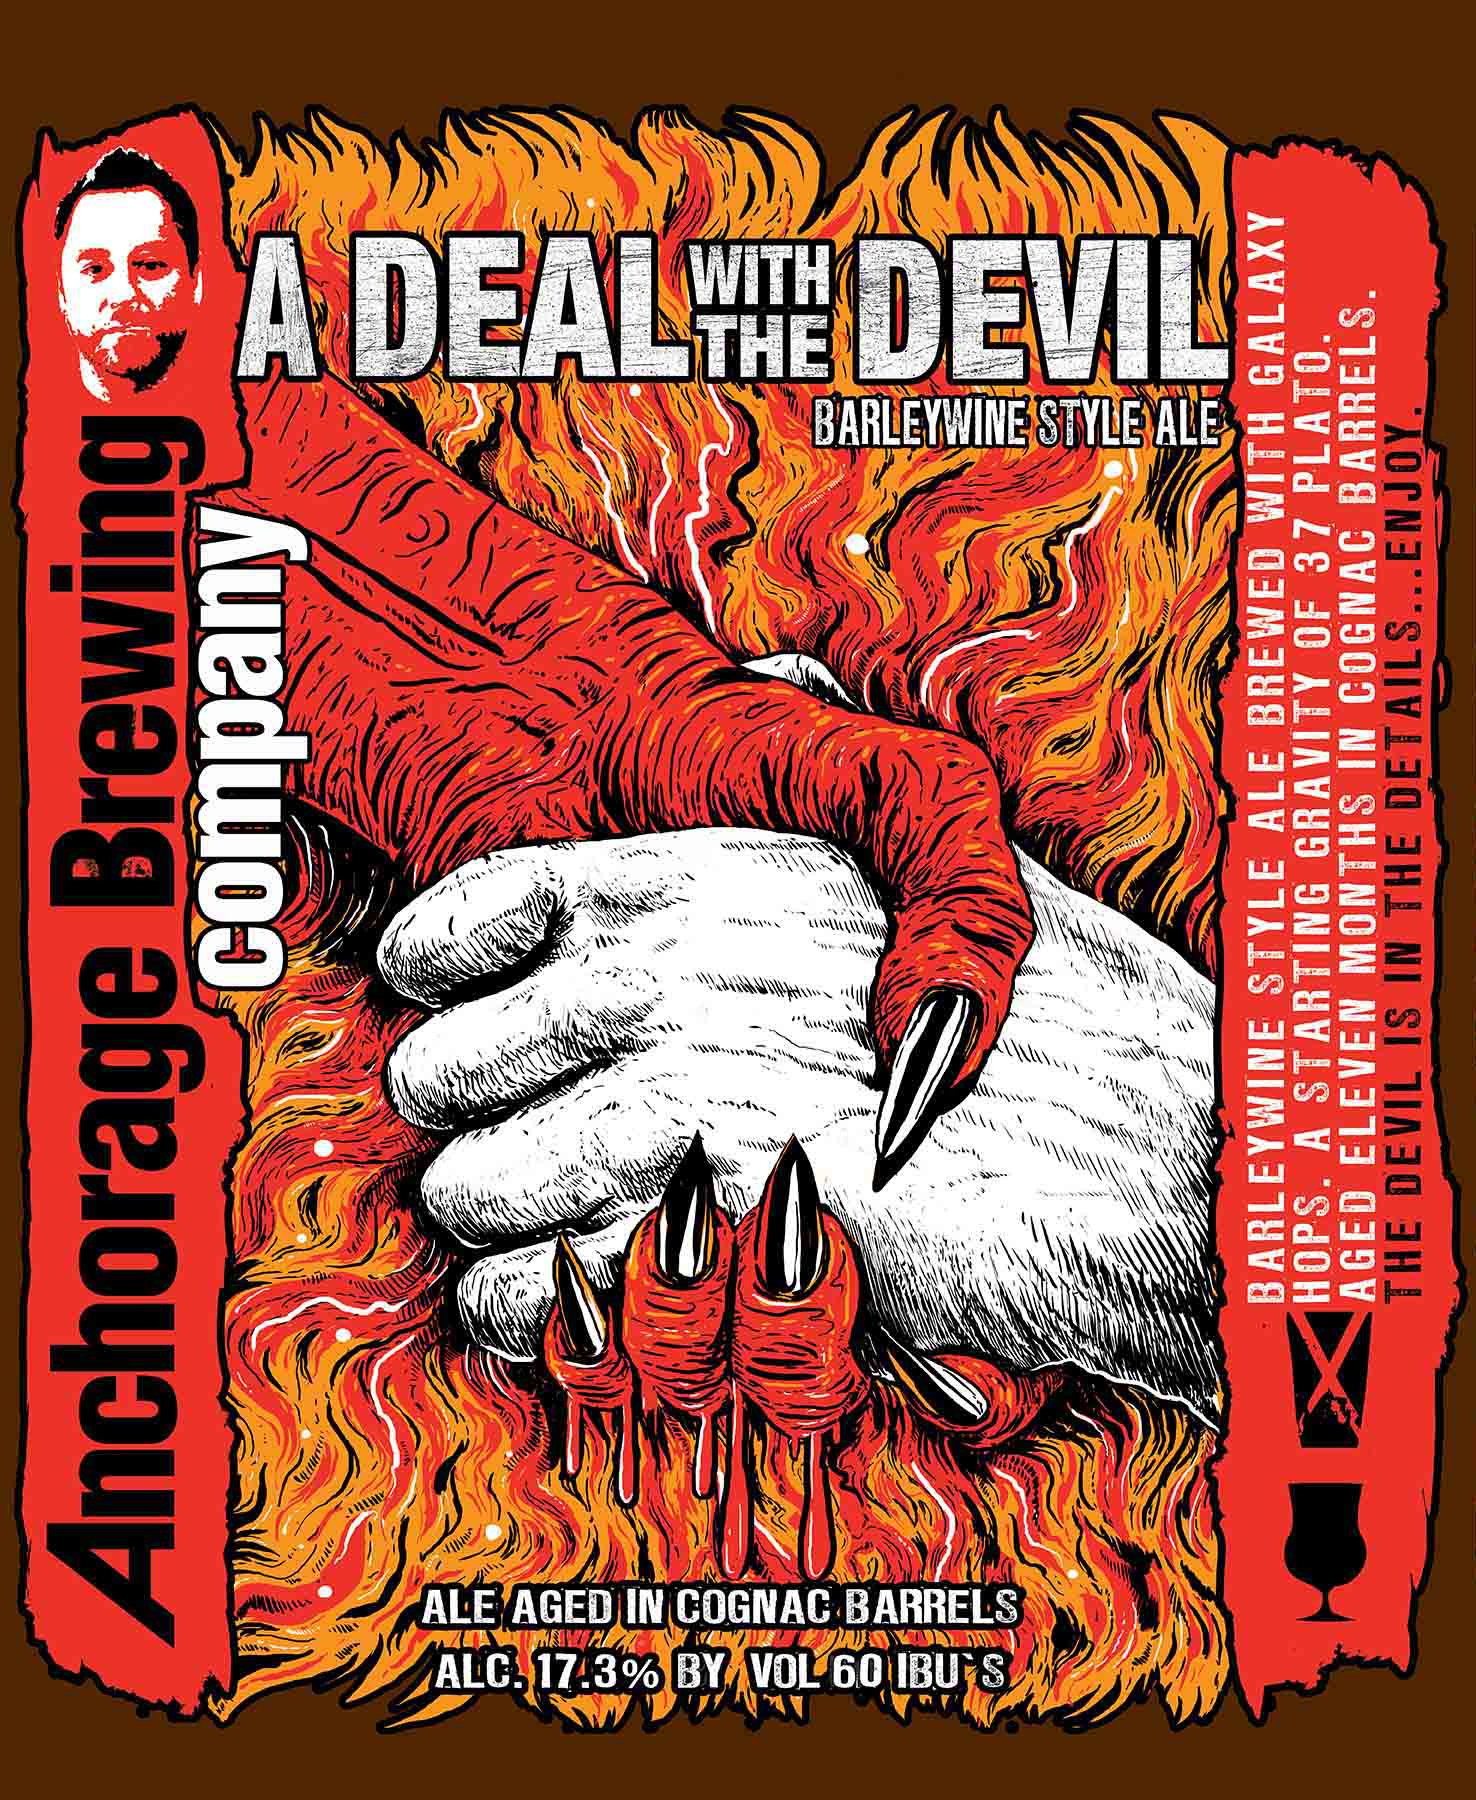 Dealing with the devil. Deal with the Devil. Deal with the Devil игра. Don't deal with the Devil фото. I made a deal with the Devil.